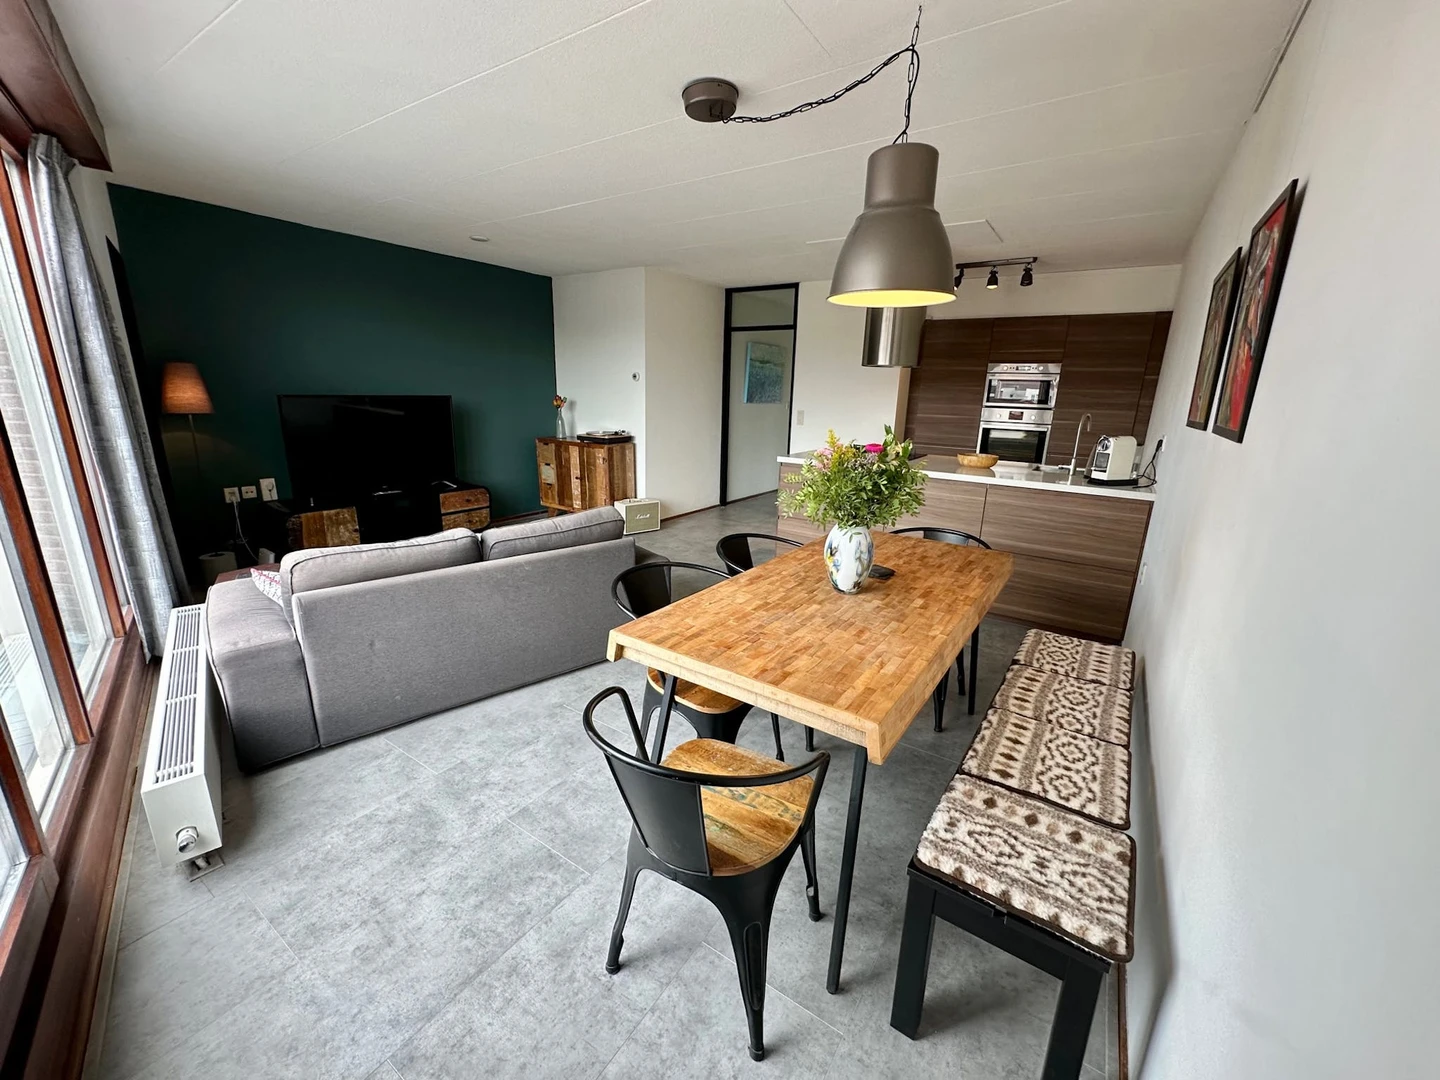 Accommodation in the centre of Haarlem